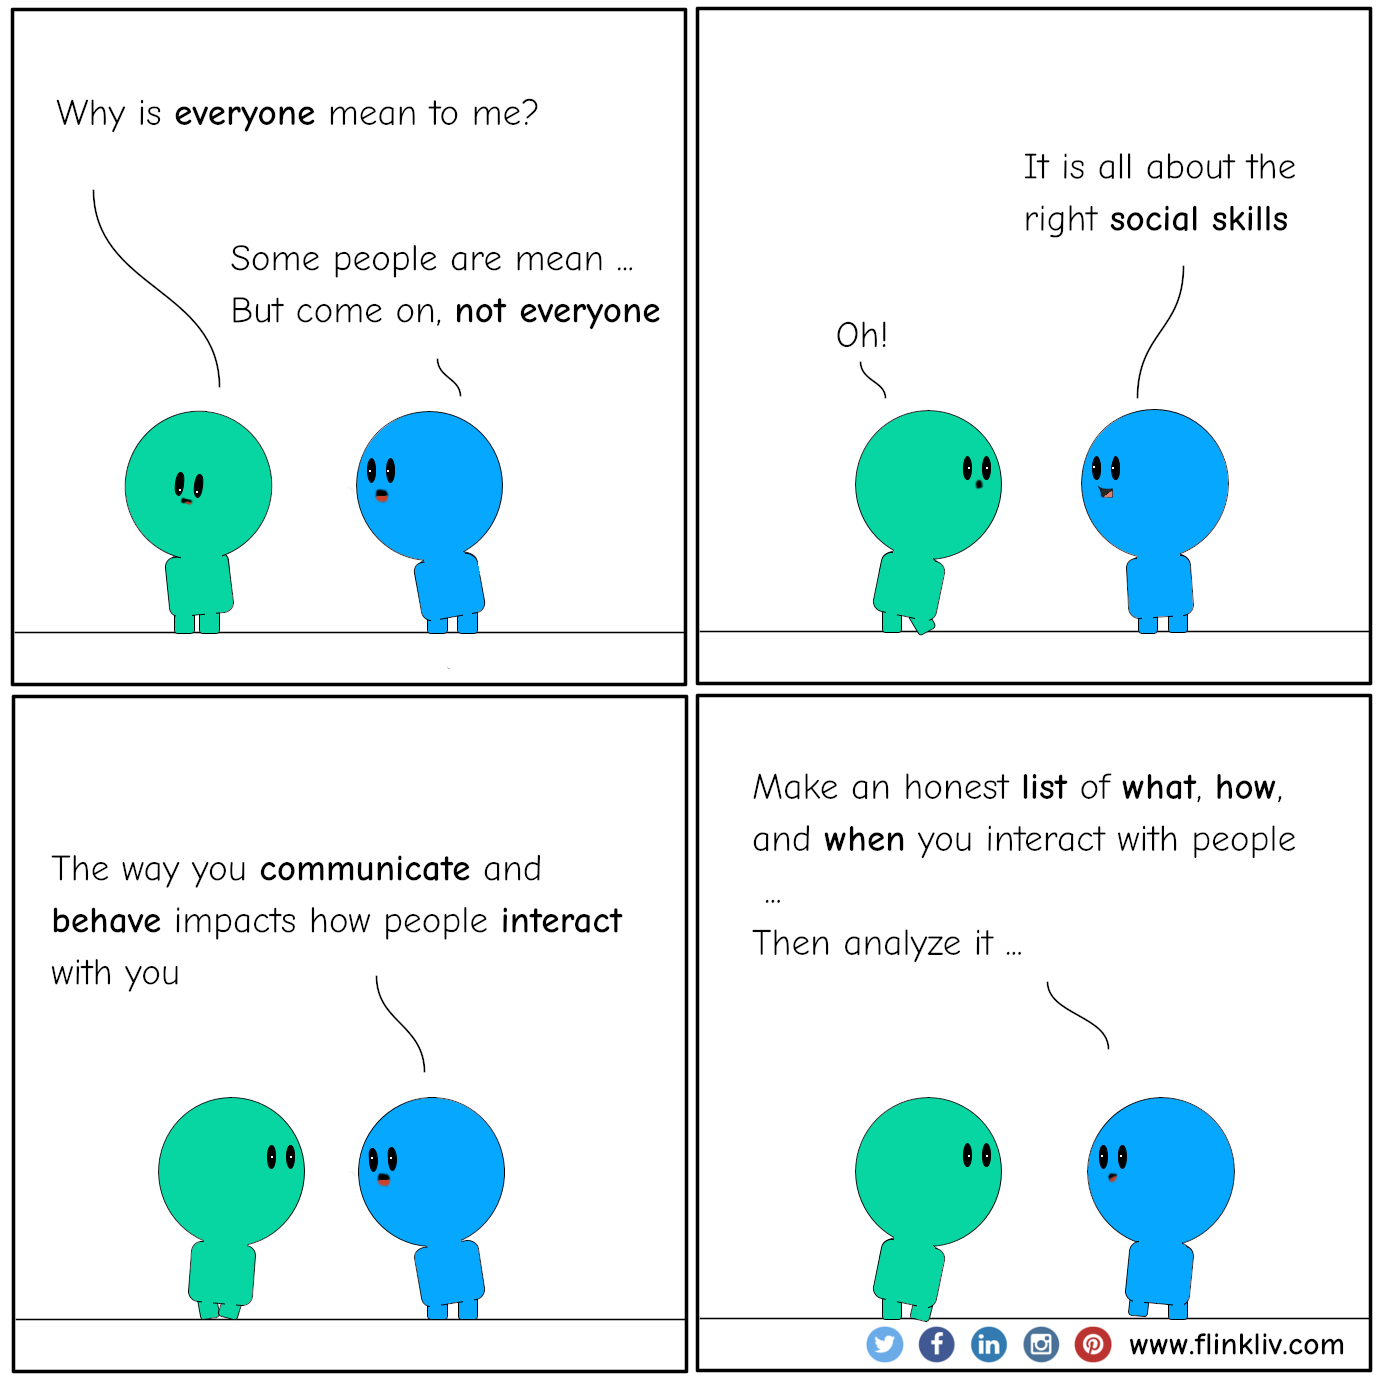 Conversation between A and B about Social skills. A: Why is everyone mean to me? B: Some people are mean, but come on, not everyone. B: It is all about the right social skills. A: Oh! B: The way you communicate and behave impacts how people interact with you. B: Make an honest list of what, how, and when you interact with people, then analyze it. By flinkliv.com